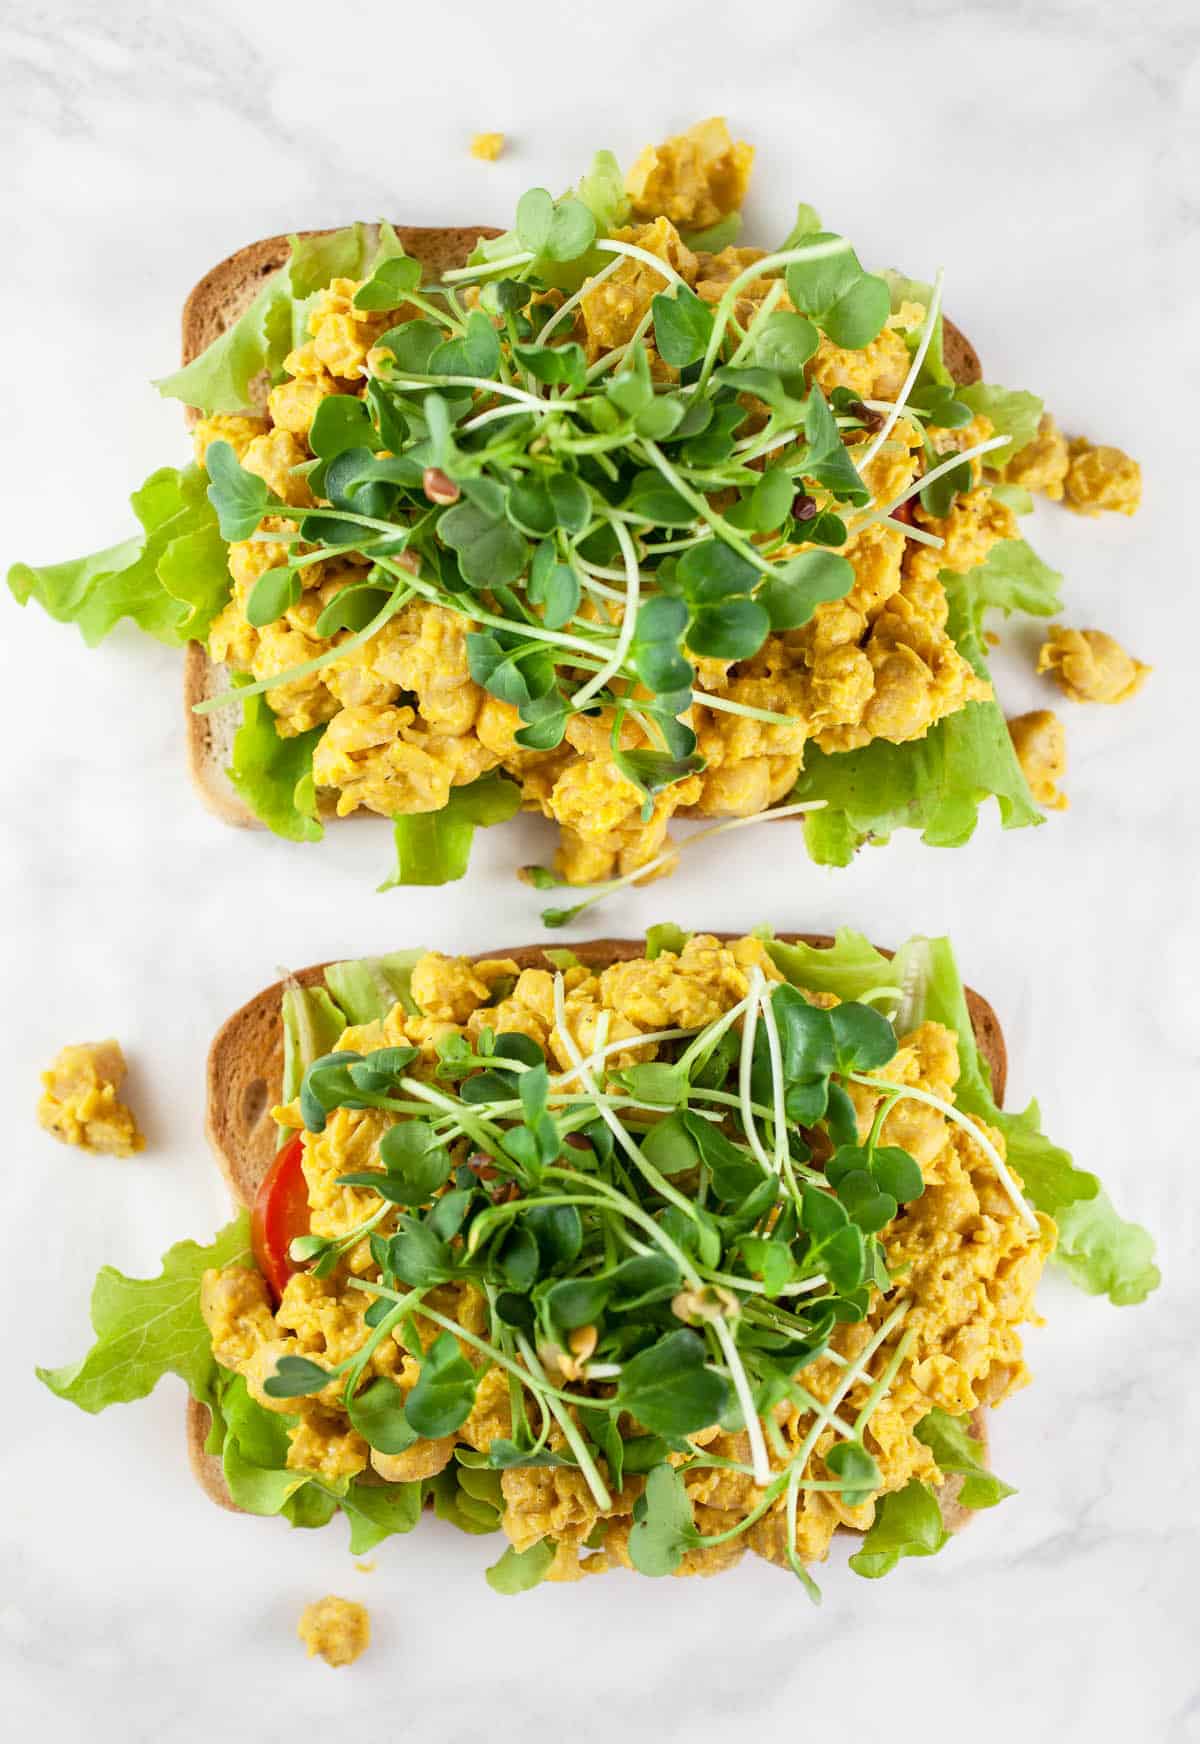 Microgreens, curried chickpeas, tomatoes, and lettuce on toasted bread.